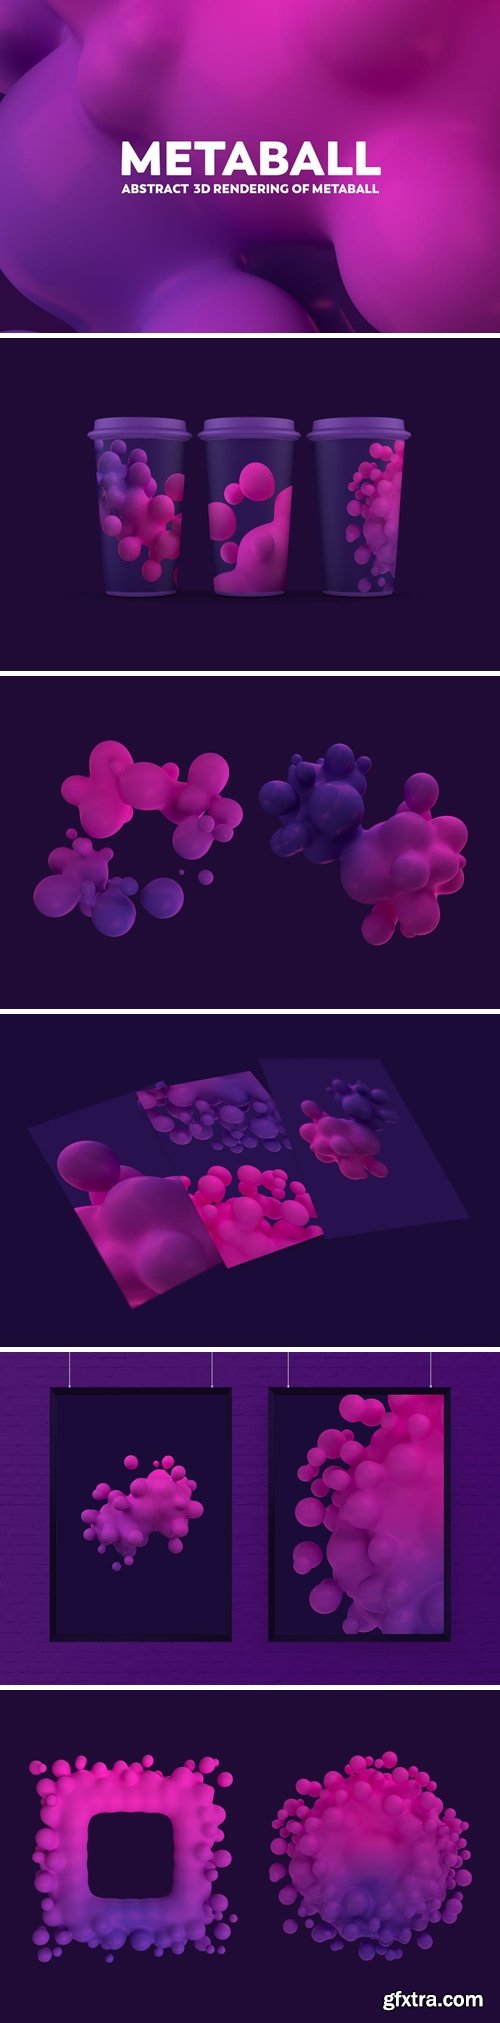 Abstract 3D Render Of Metaball - Pink And Purple